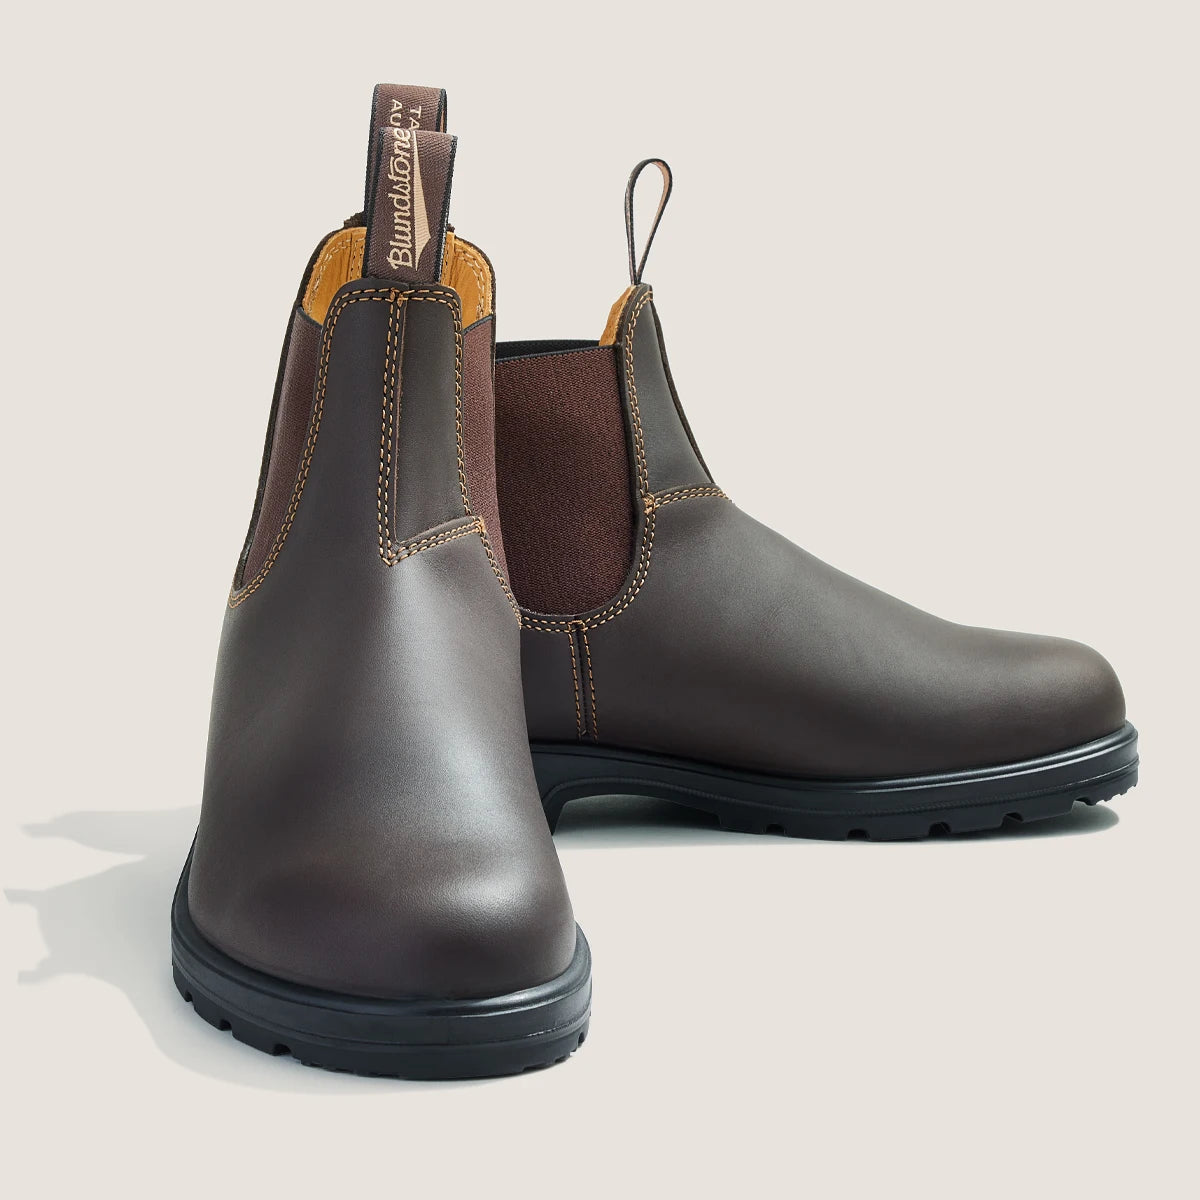 Blundstone 550 ブーツ色…チェスナット